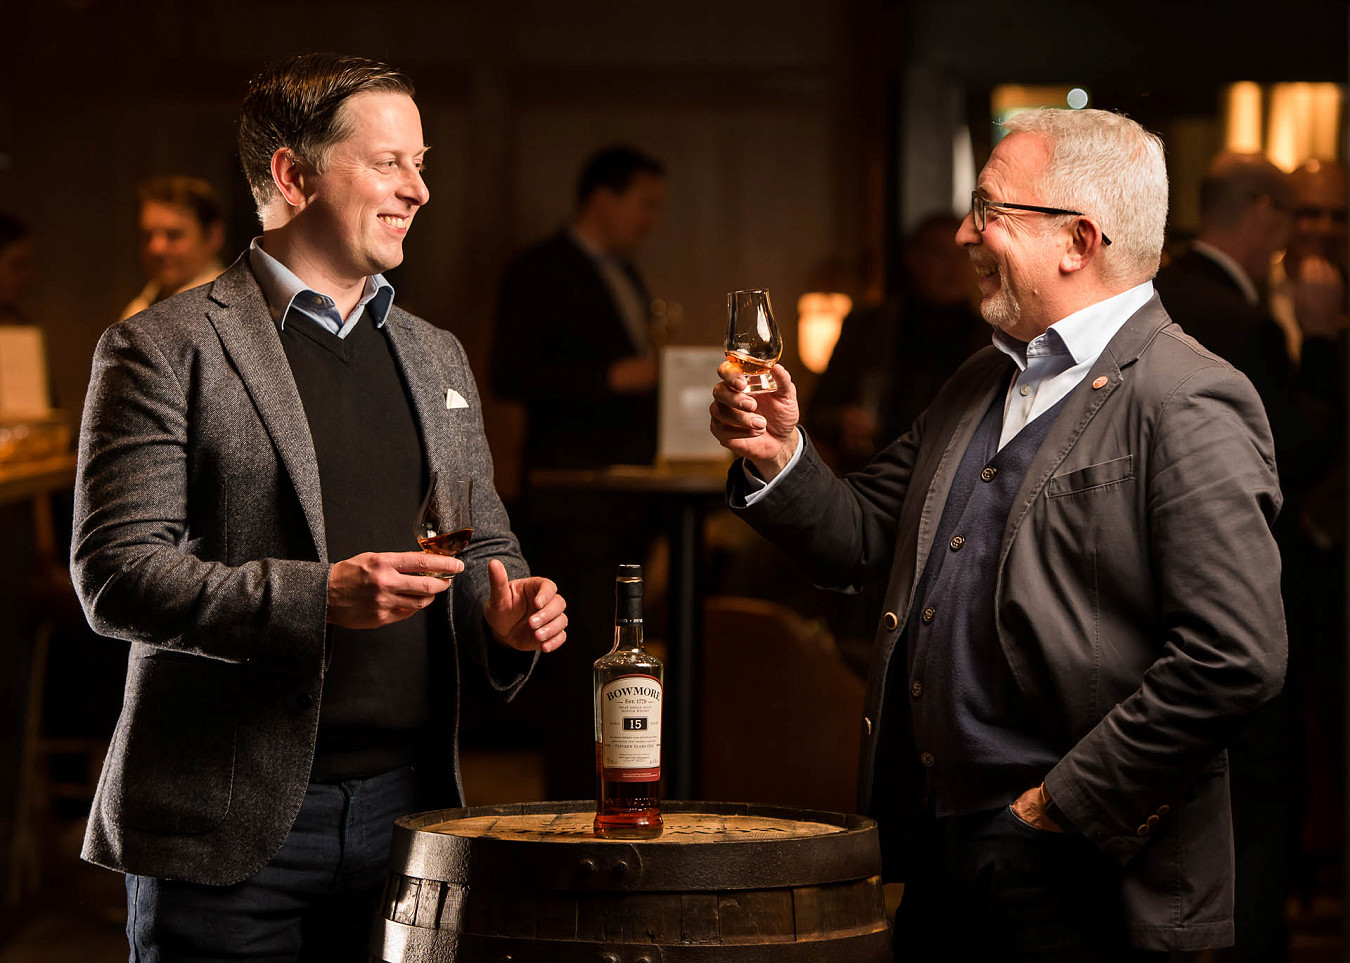 Two master distillers smiling while drinking a Bowmore whisky